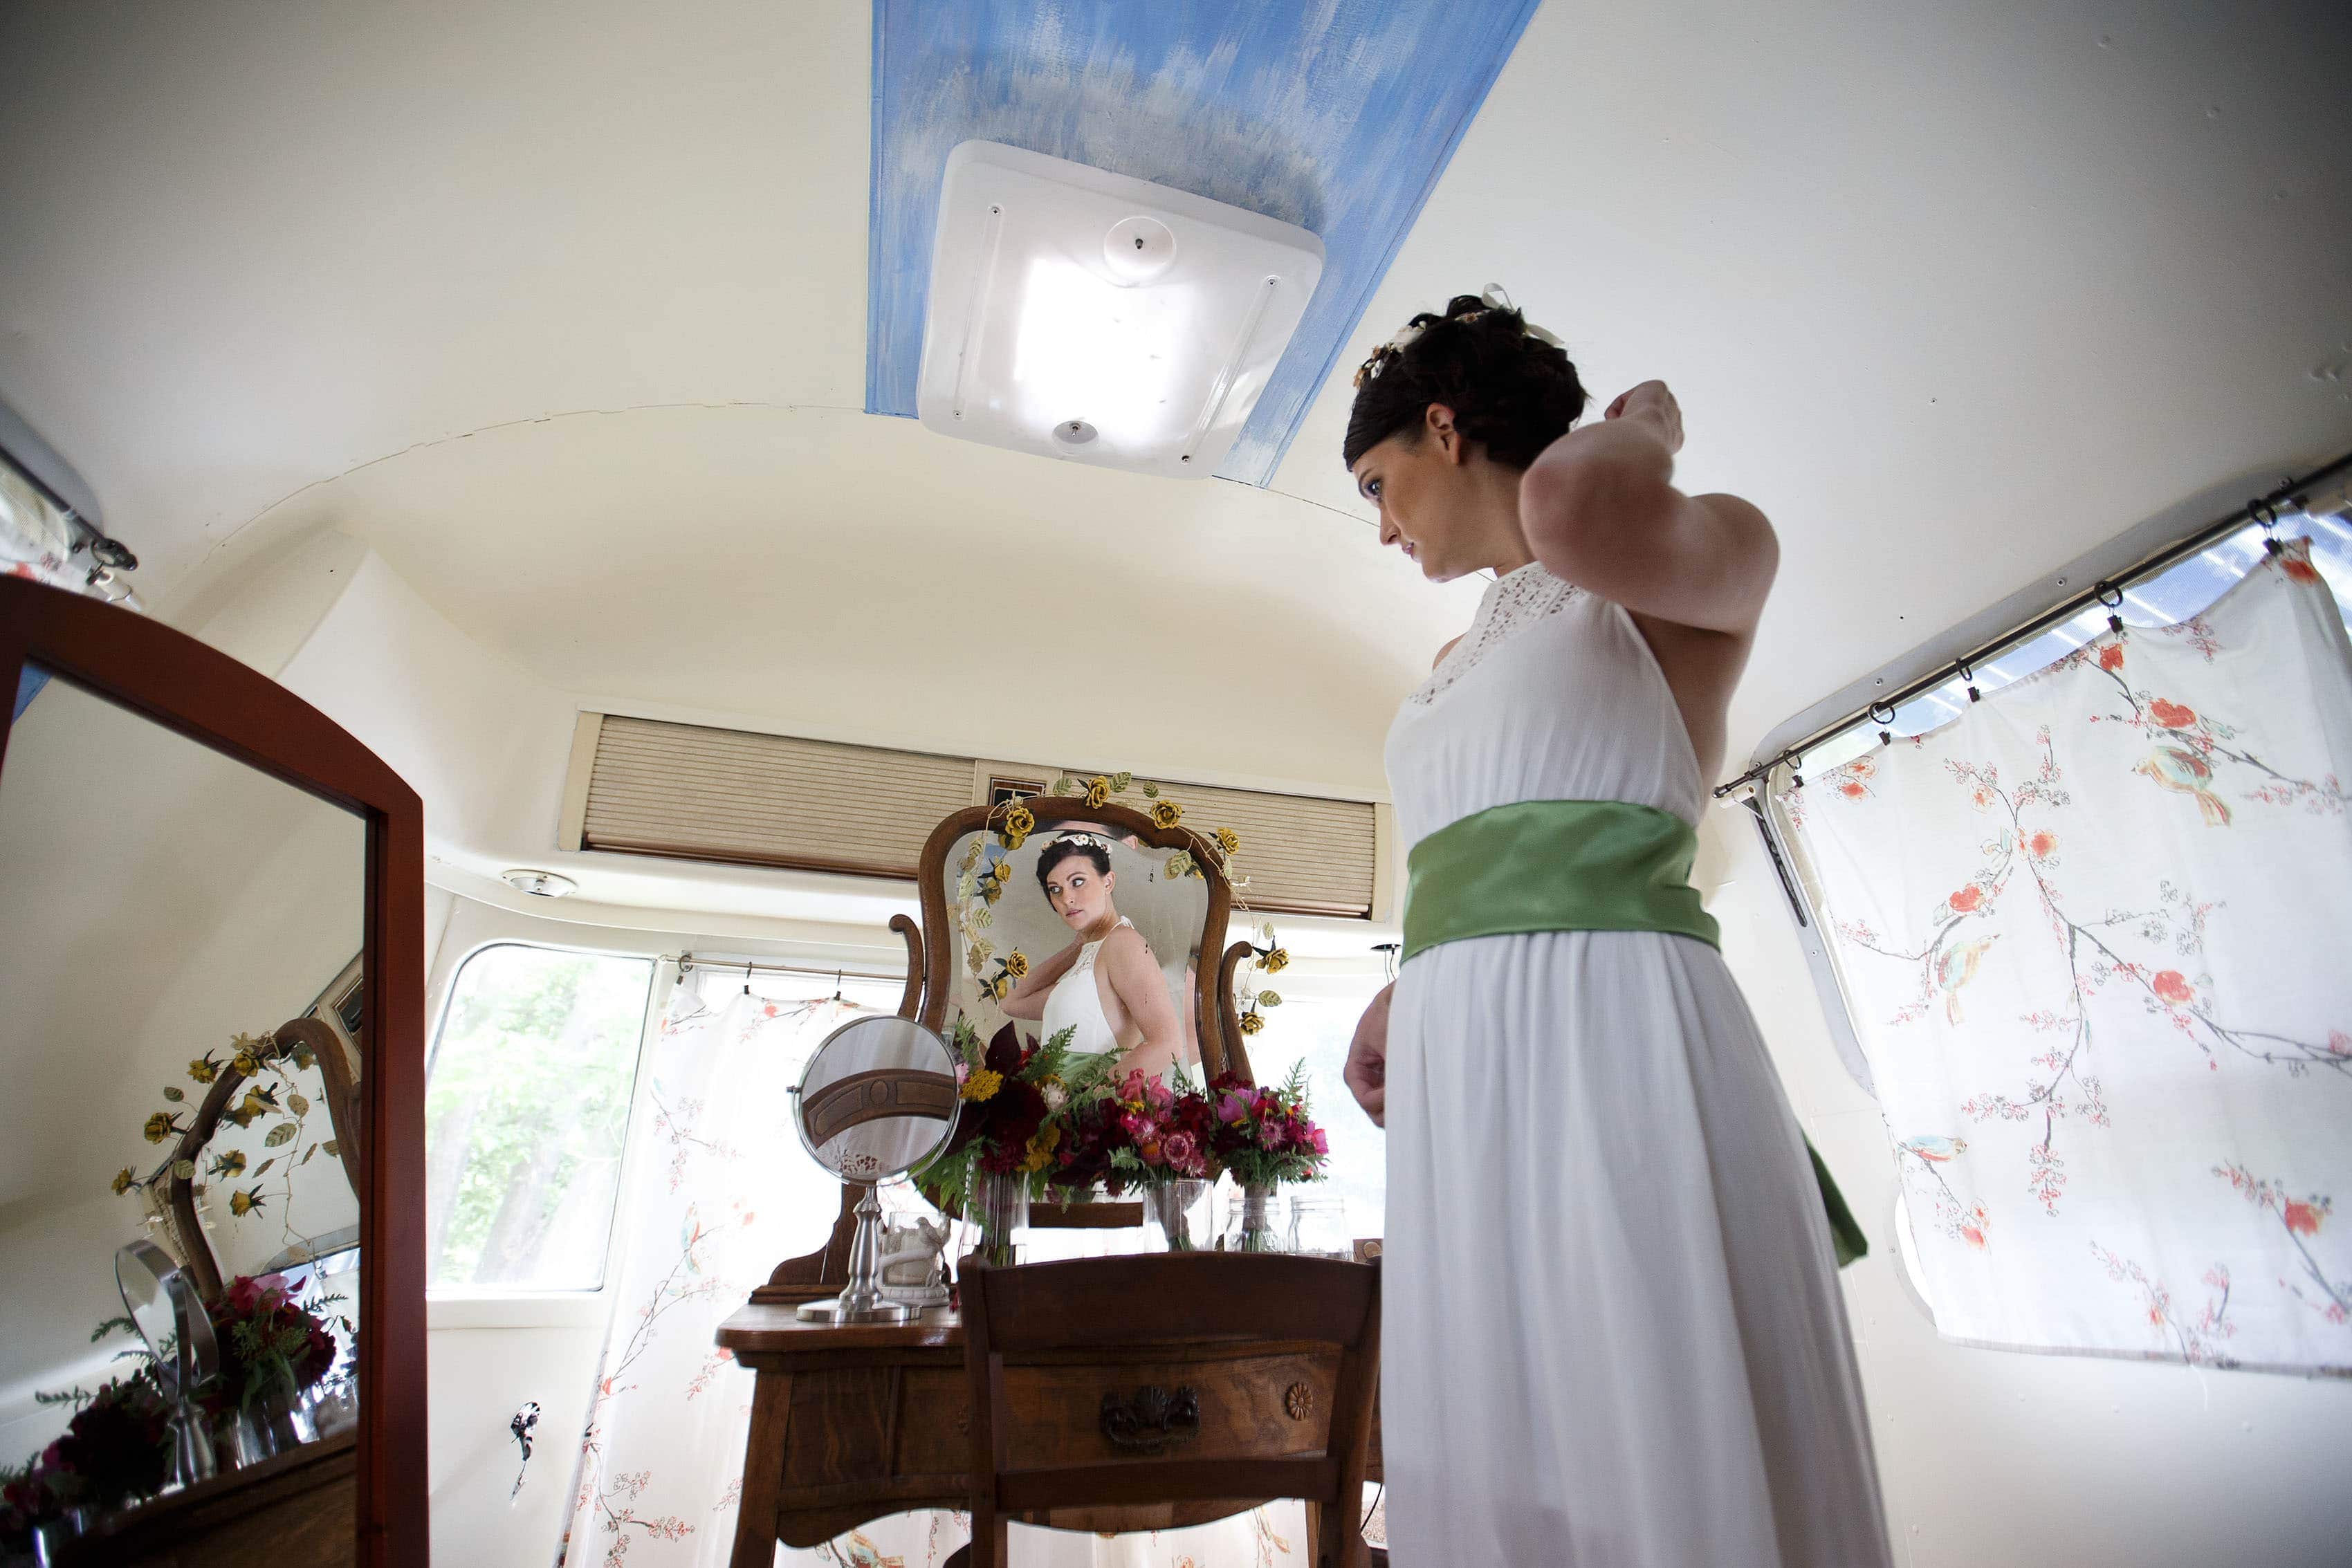 Meghan looks in the mirror inside the airstream at Lyons Farmette